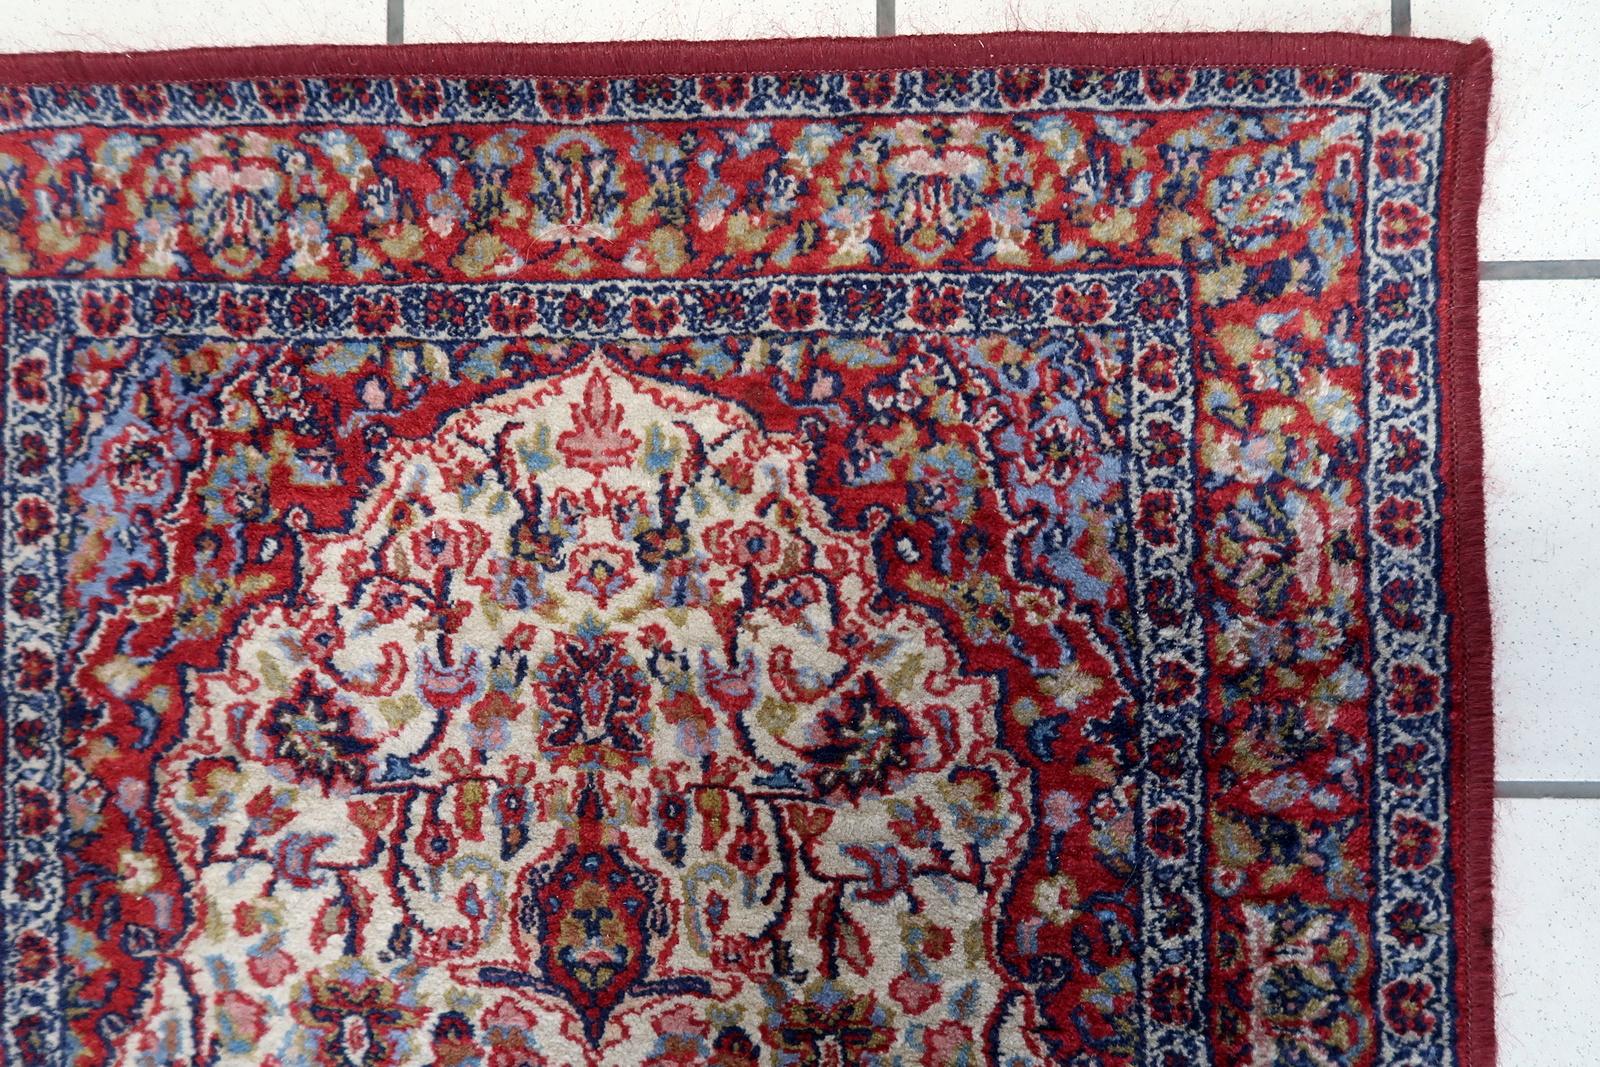 Vintage Indian Rug:

Dimensions: This meticulously crafted rug measures 2.1’ x 3.9’ (67cm x 120cm), making it suitable for smaller spaces or as an accent piece.
Craftsmanship: Originating from the 1970s, this rug showcases the artistry of Indian